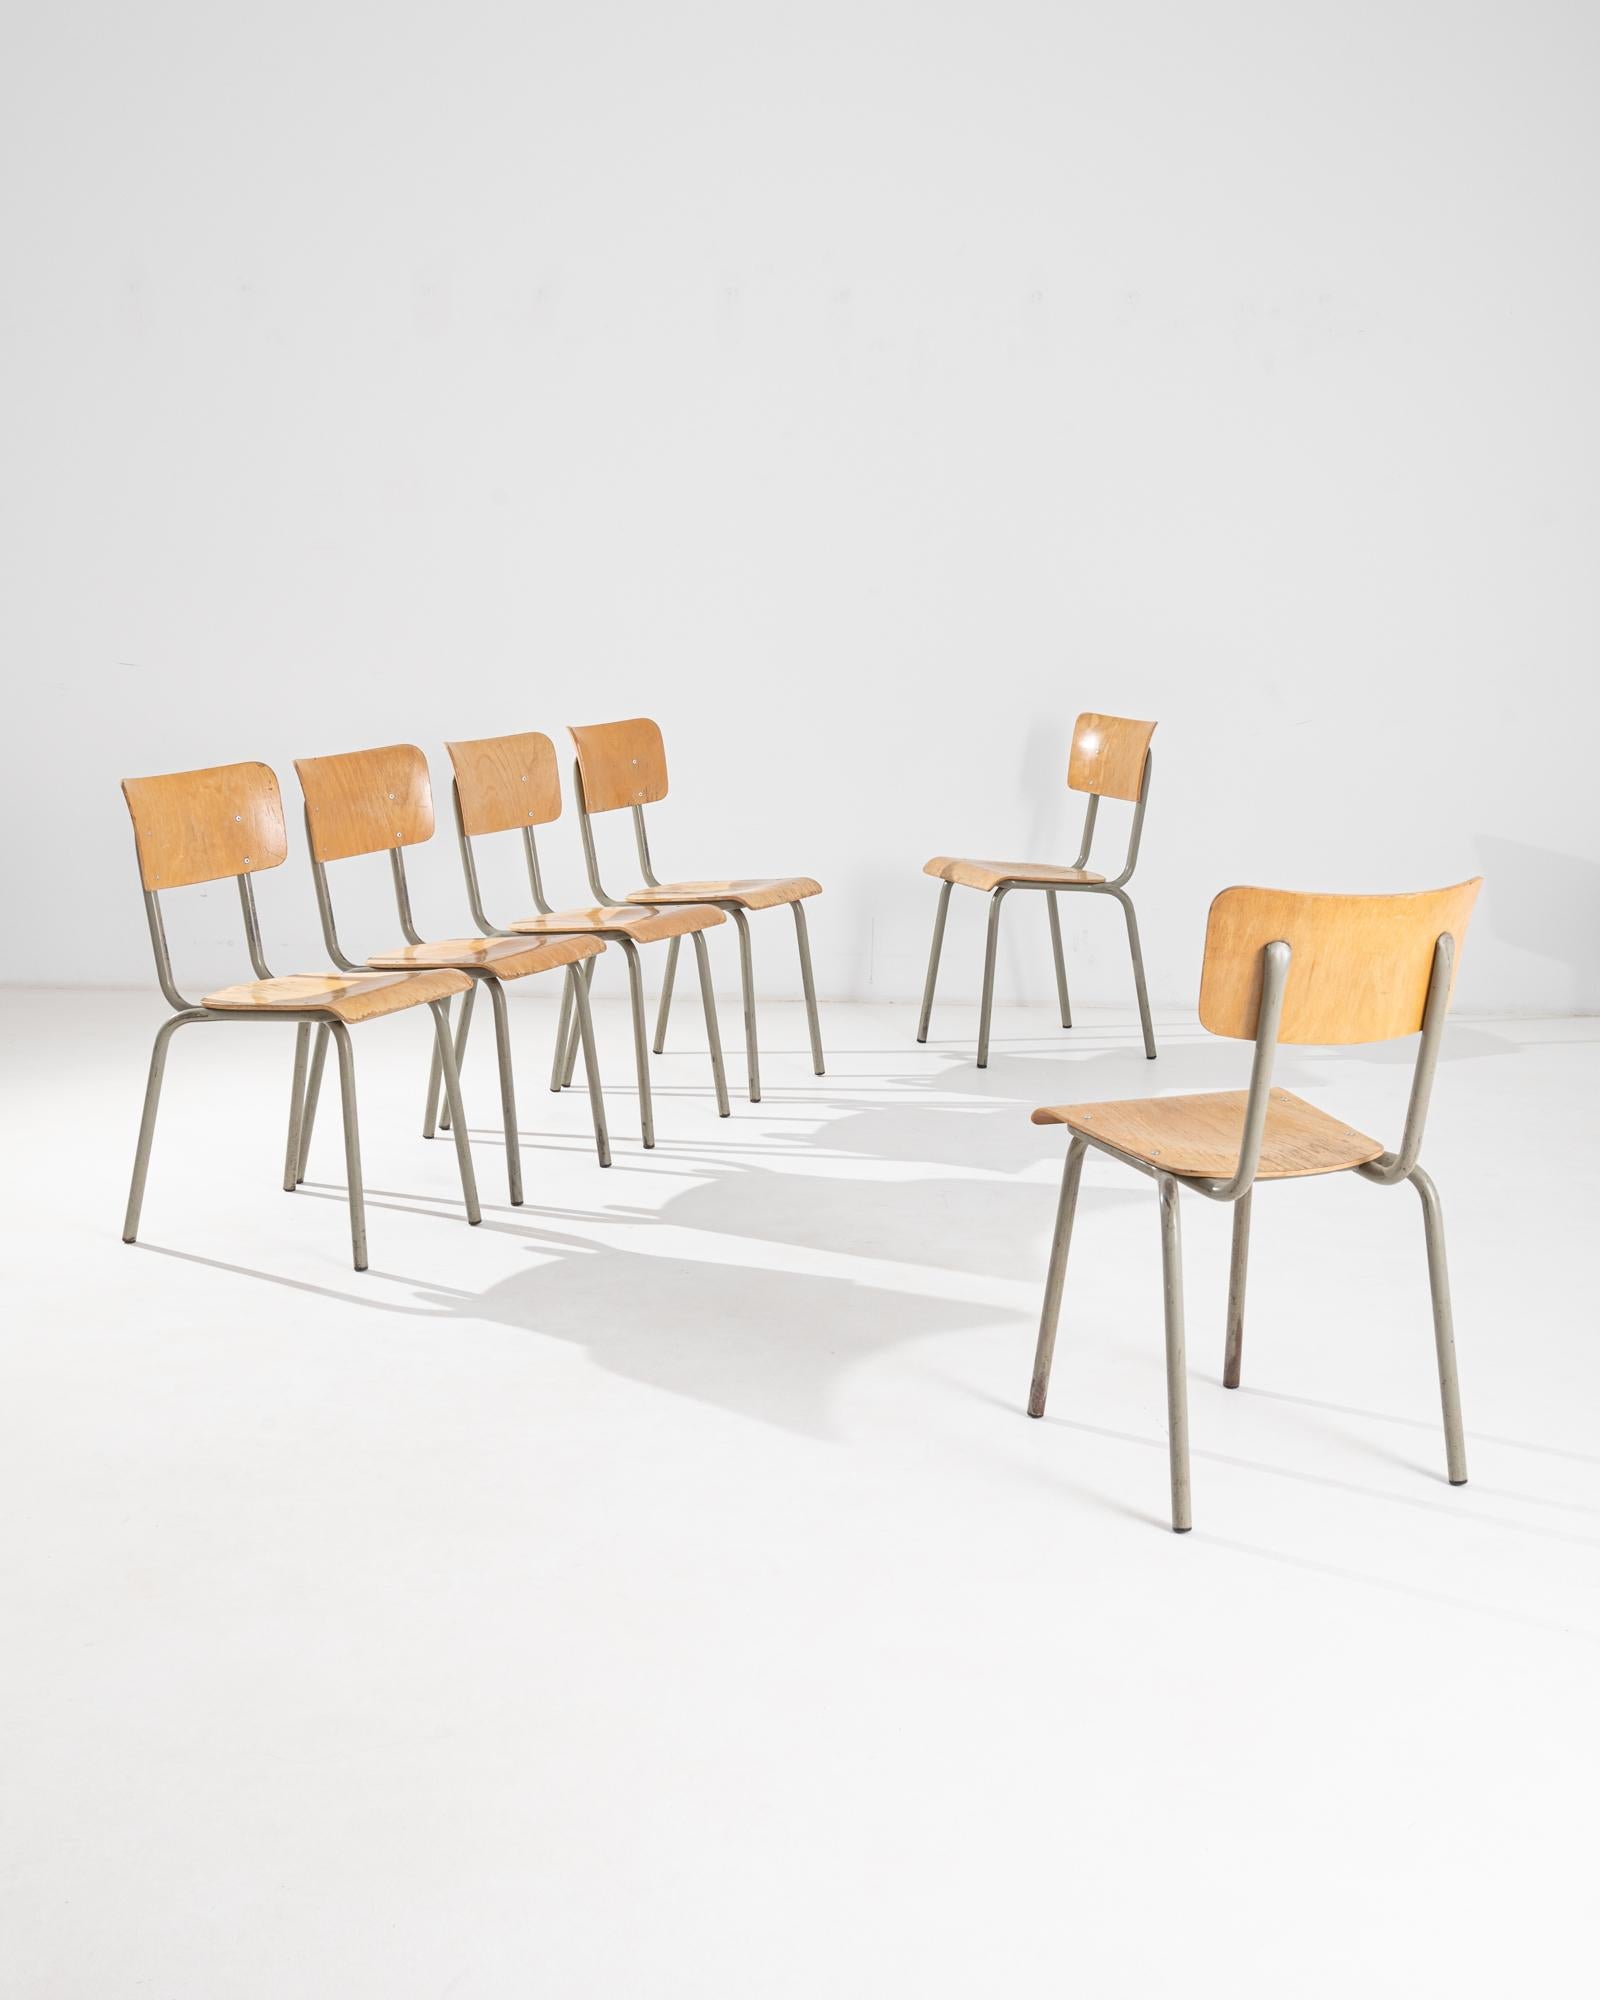 A set of six 20th century metal chairs manufactured in Belgium by the company Tubax, one of the largest Belgian manufacturers of metal furniture. Made of industrial powder-coated steel, this design is one of the best known Tubax chairs. Simple and